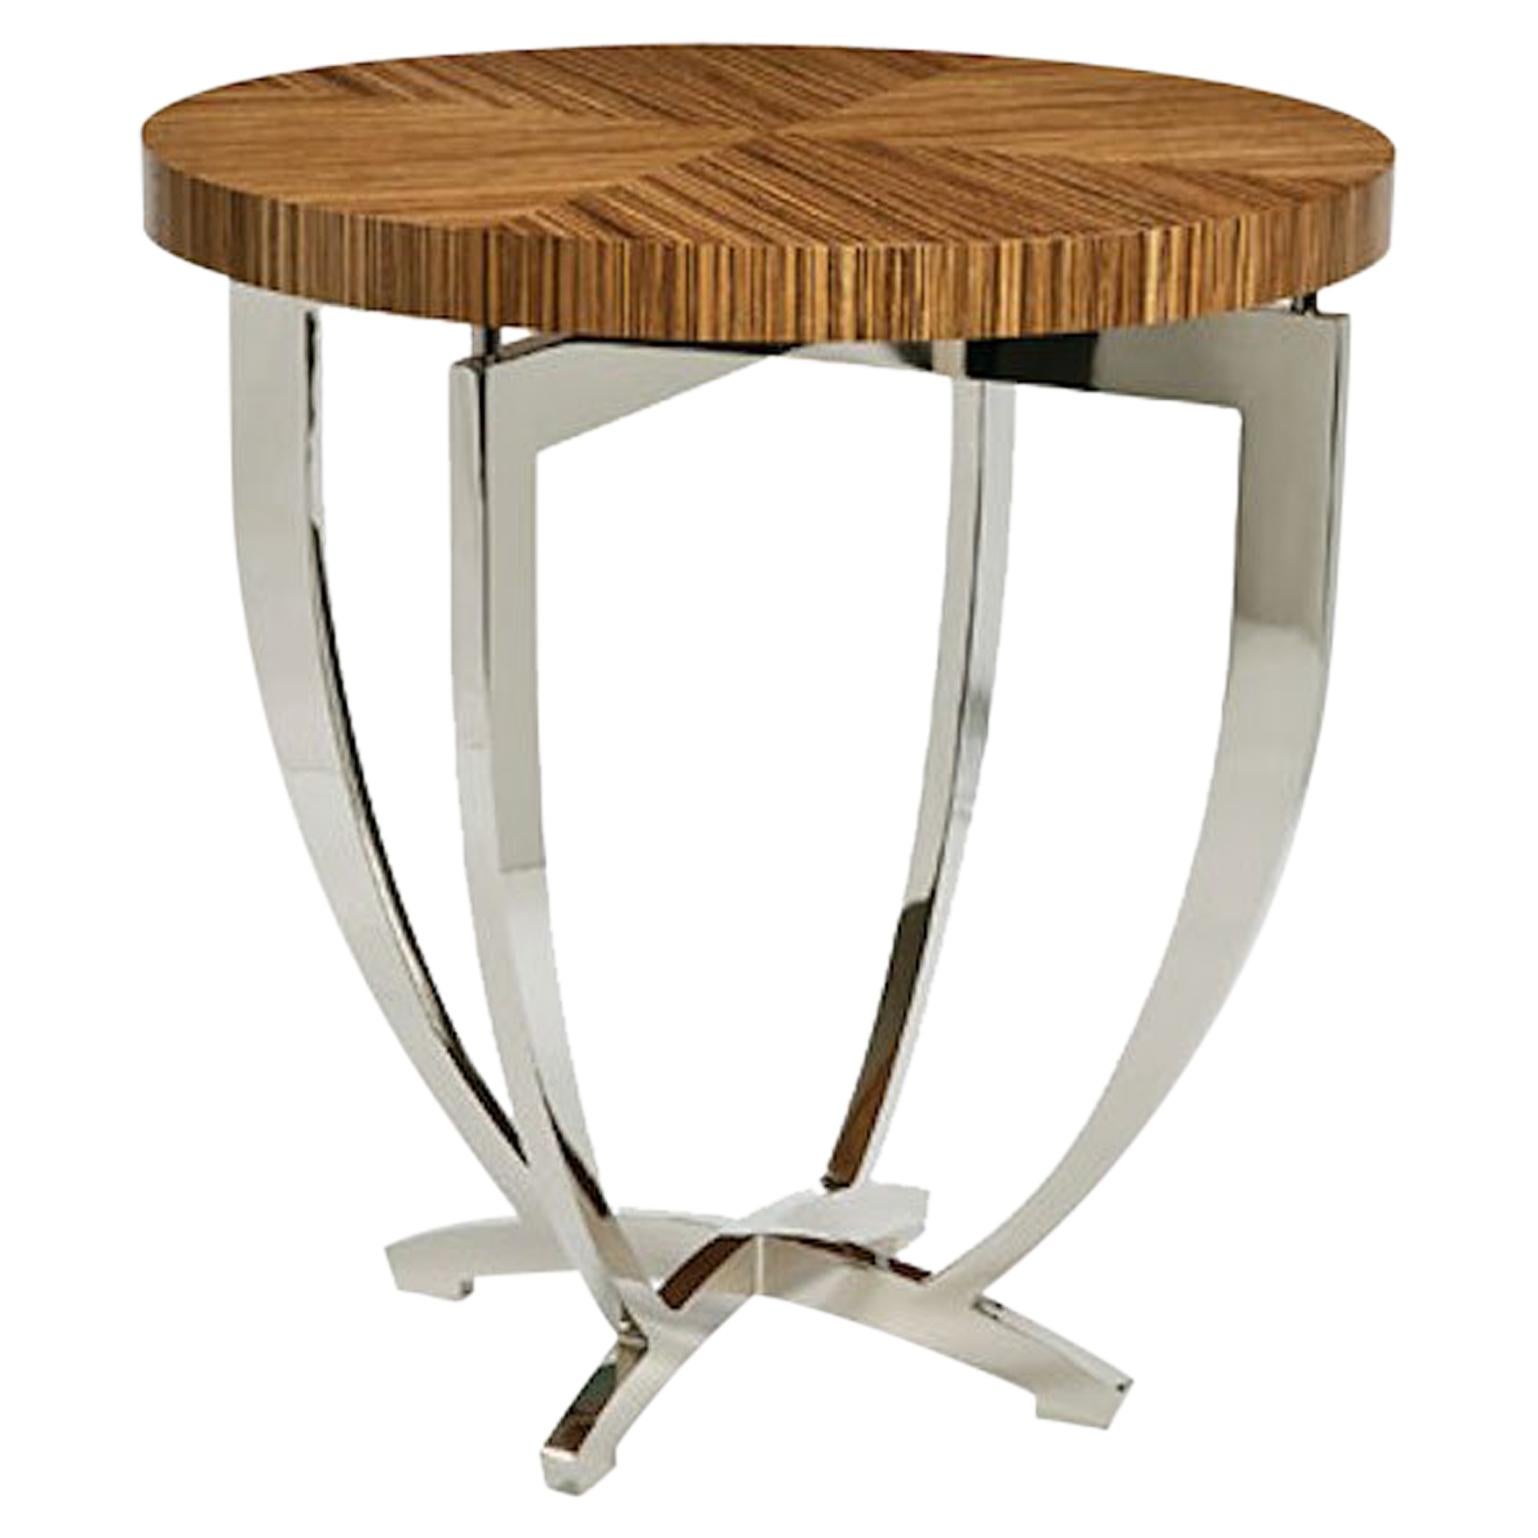 Stromboli Occasional Table with Wooden Top by Powell & Bonnell For Sale